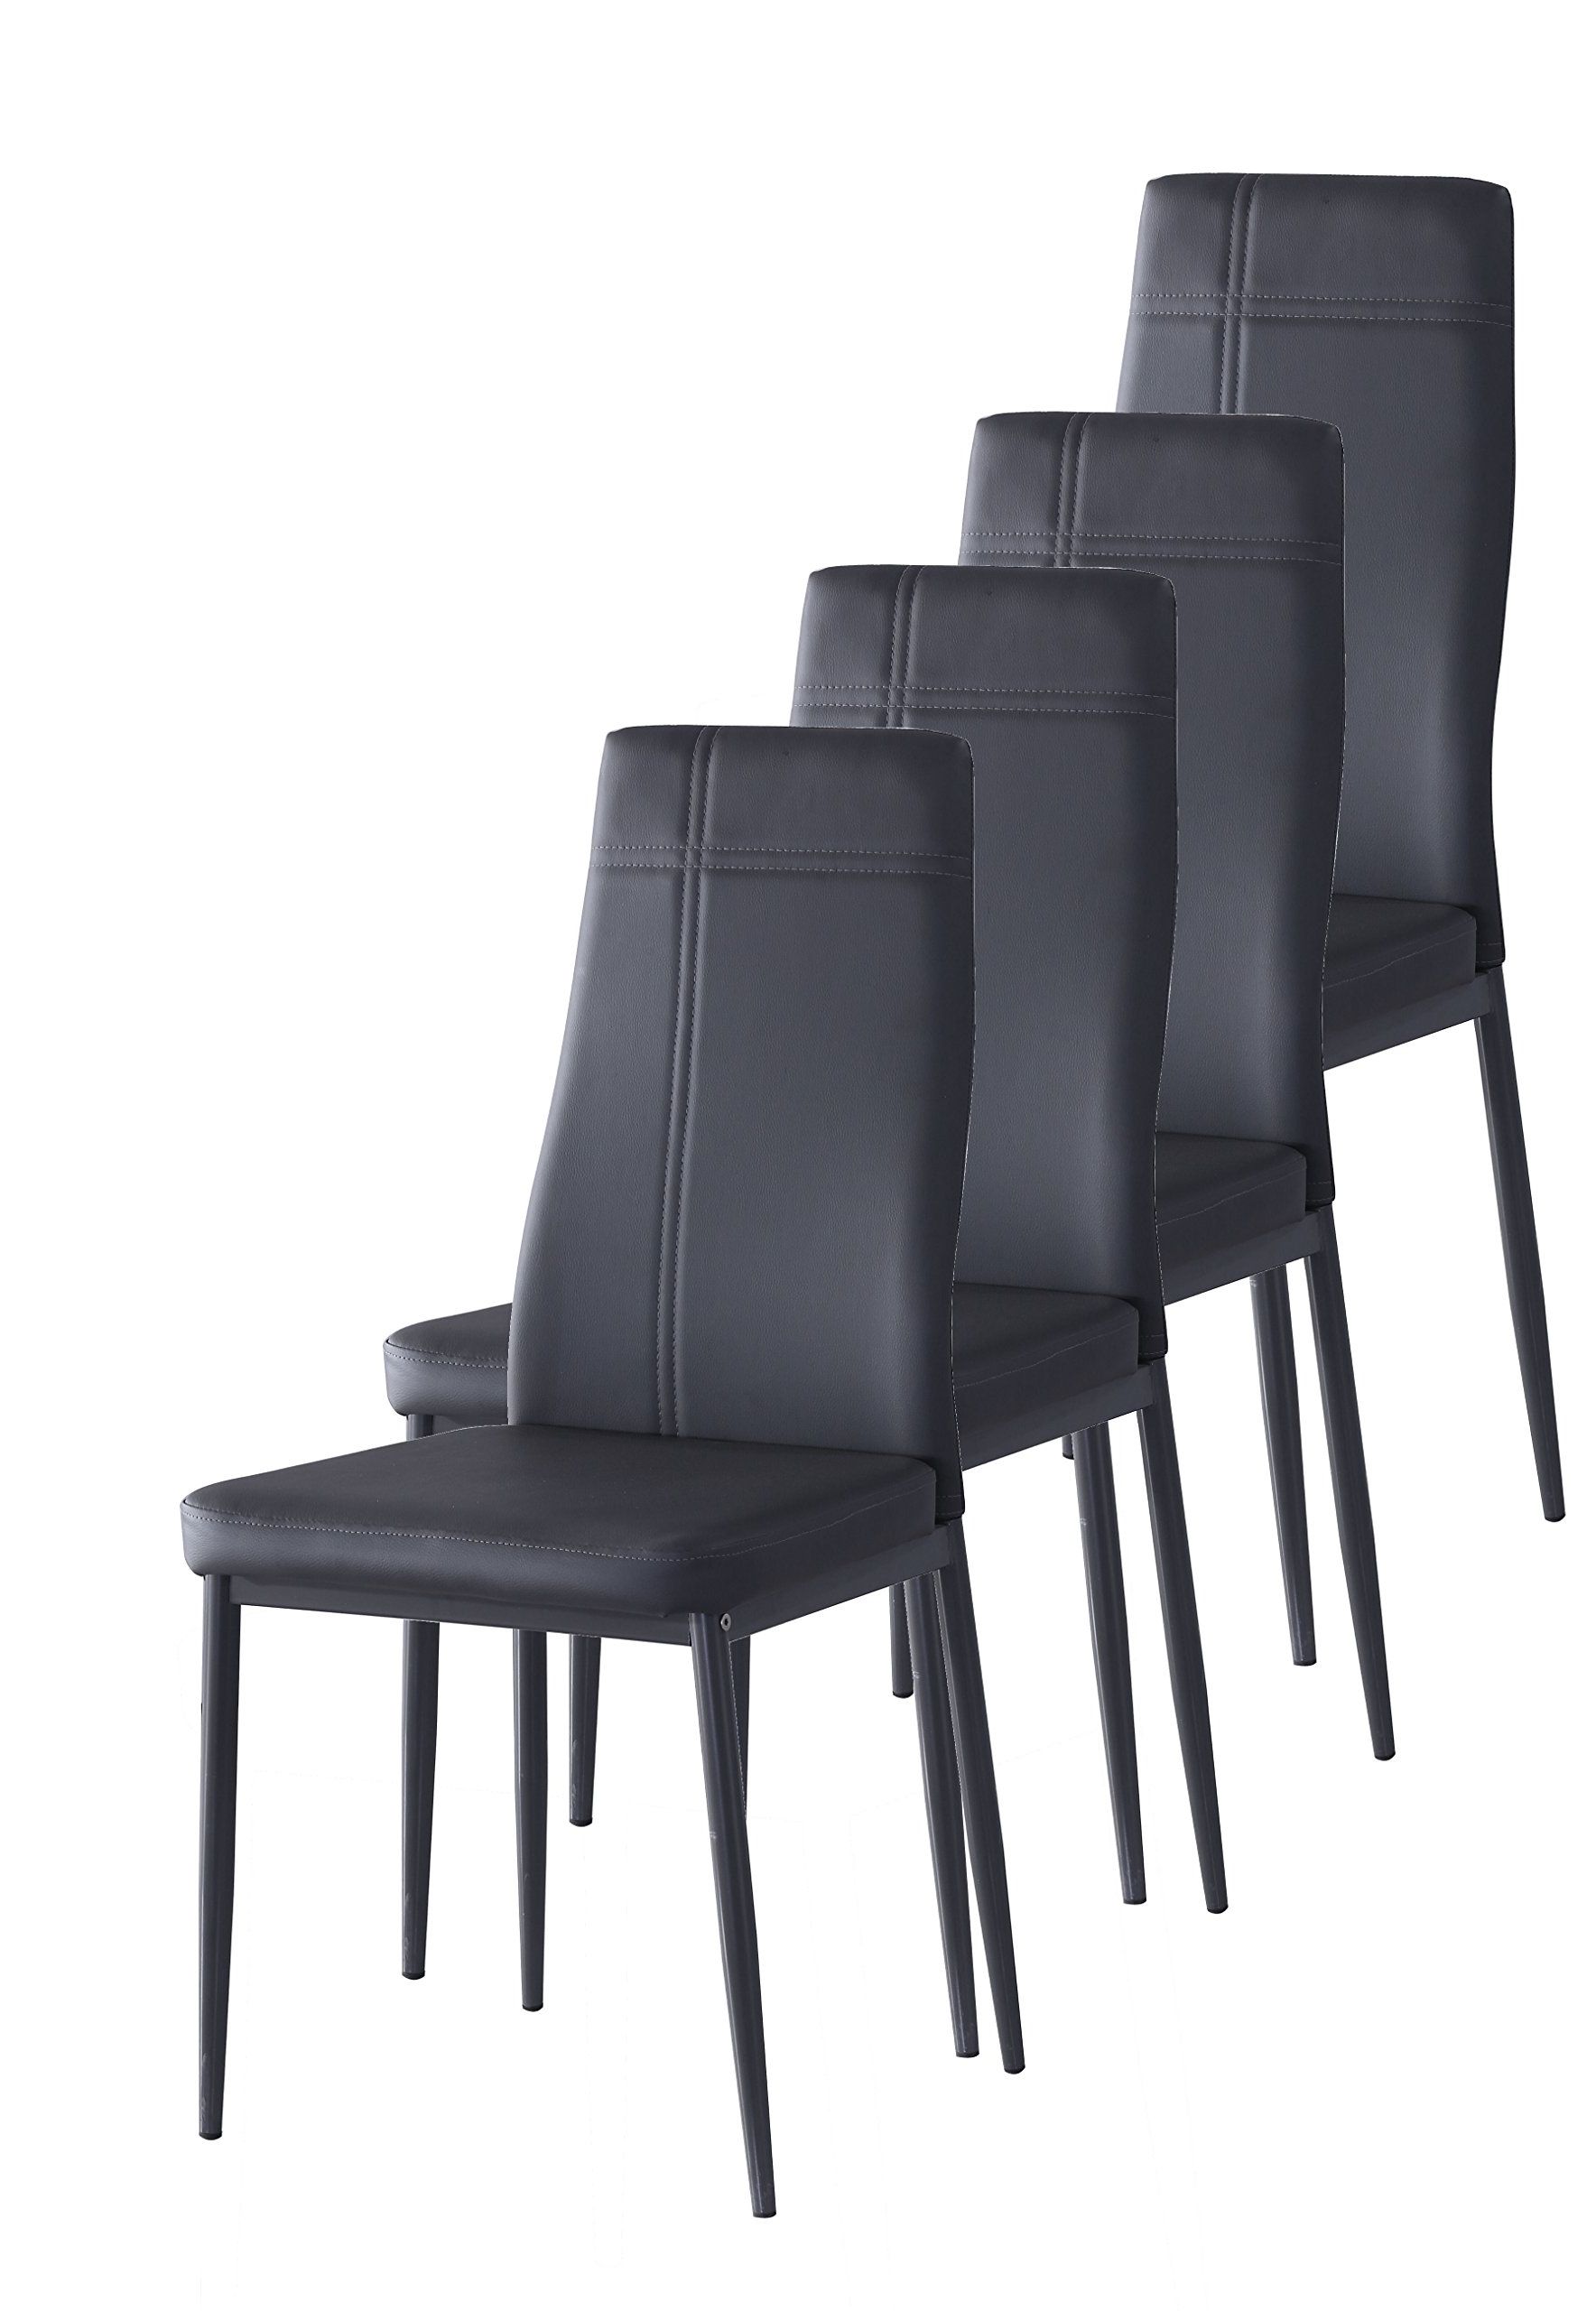 Alexa Grey Side Chairs Within Recent Amazon – Kings Brand Gray Metal Frame Dining Side Chair (grey (Photo 7 of 20)